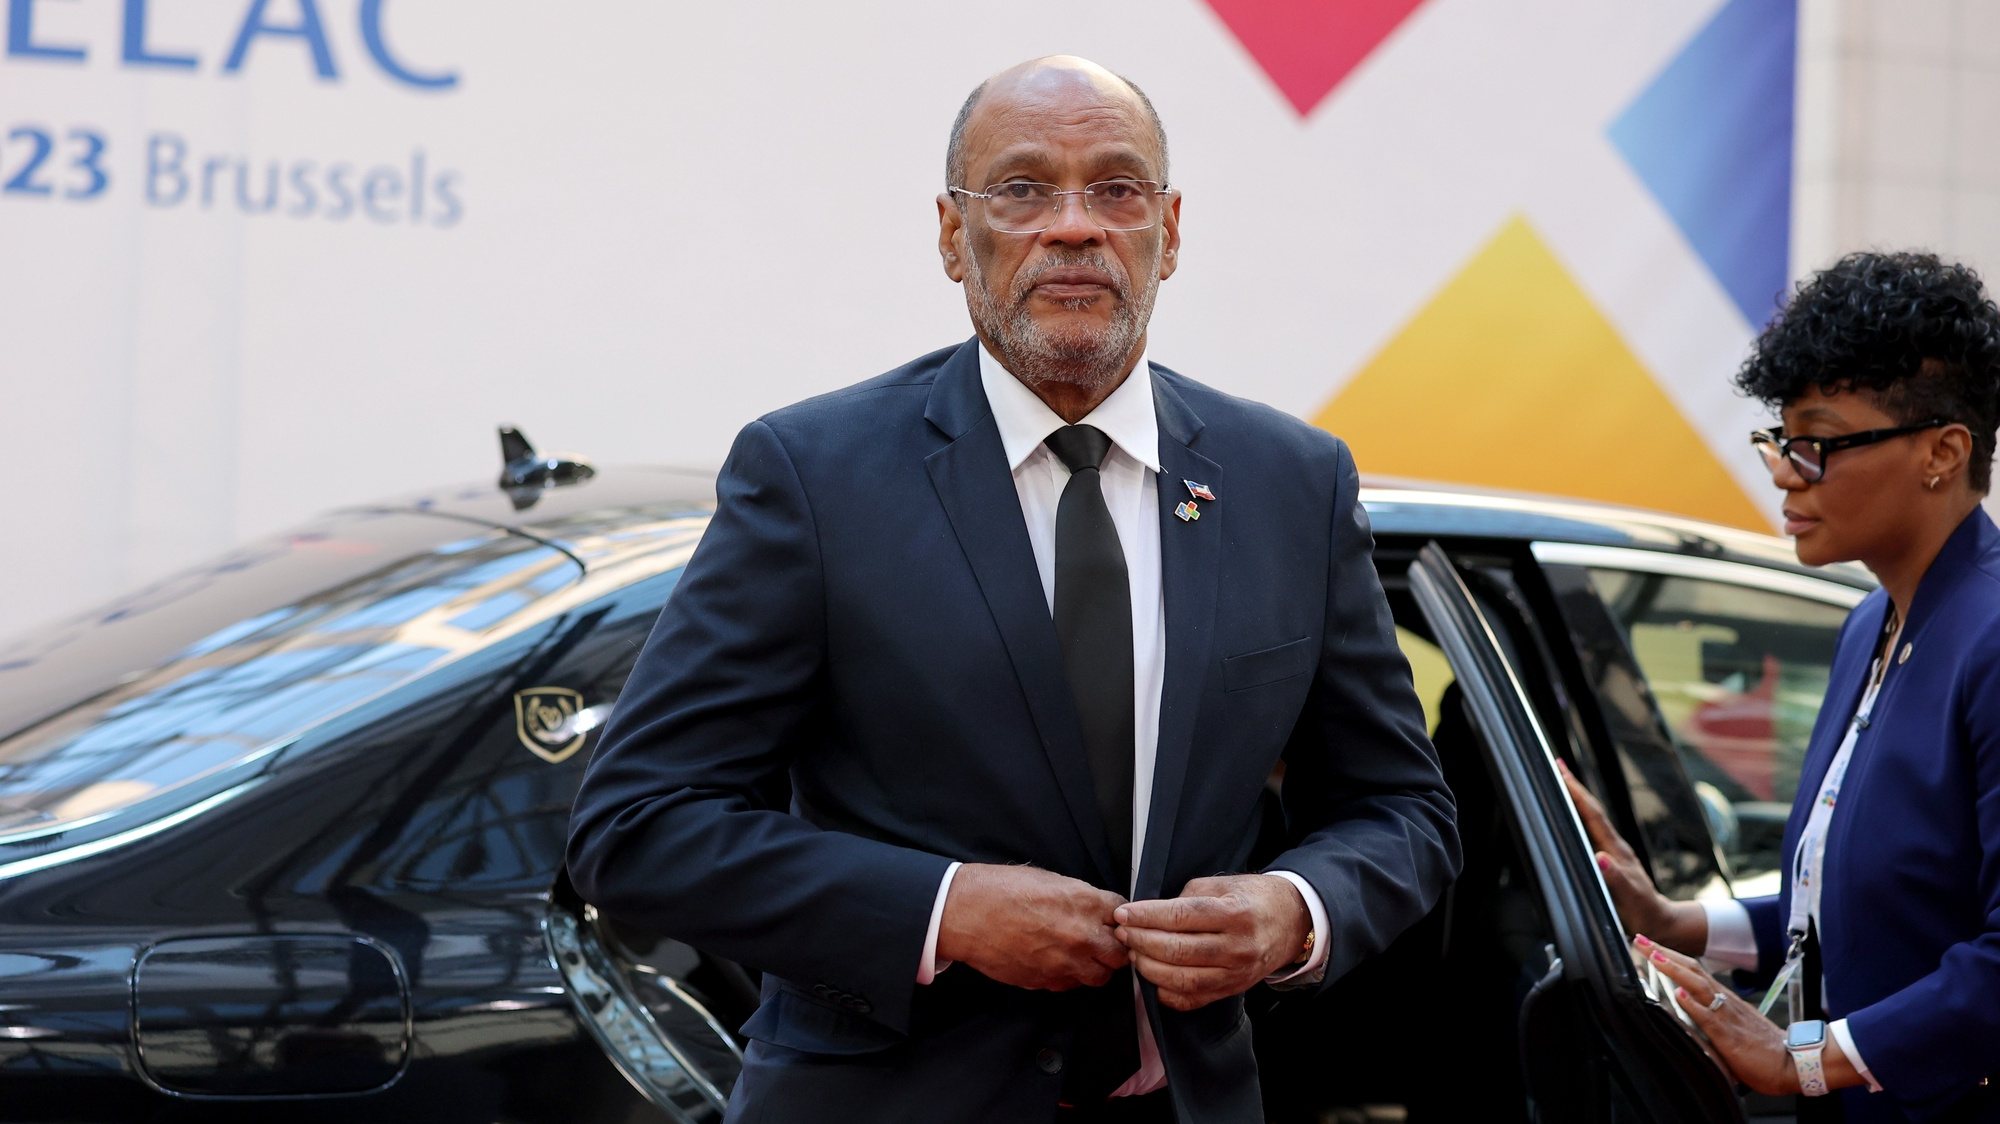 epa11215567 (FILE) - Haiti&#039;s Prime Minister Ariel Henry arrives for the second day of the EU-CELAC Summit of Heads of State and Government in Brussel, Belgium, 18 July 2023 (reissued 12 March 2024). According to a statement from the Caribbean Community and Common Market (CARICOM) regional bloc, Prime Minister of Haiti Ariel Henry resigned.  EPA/Julien Warnand